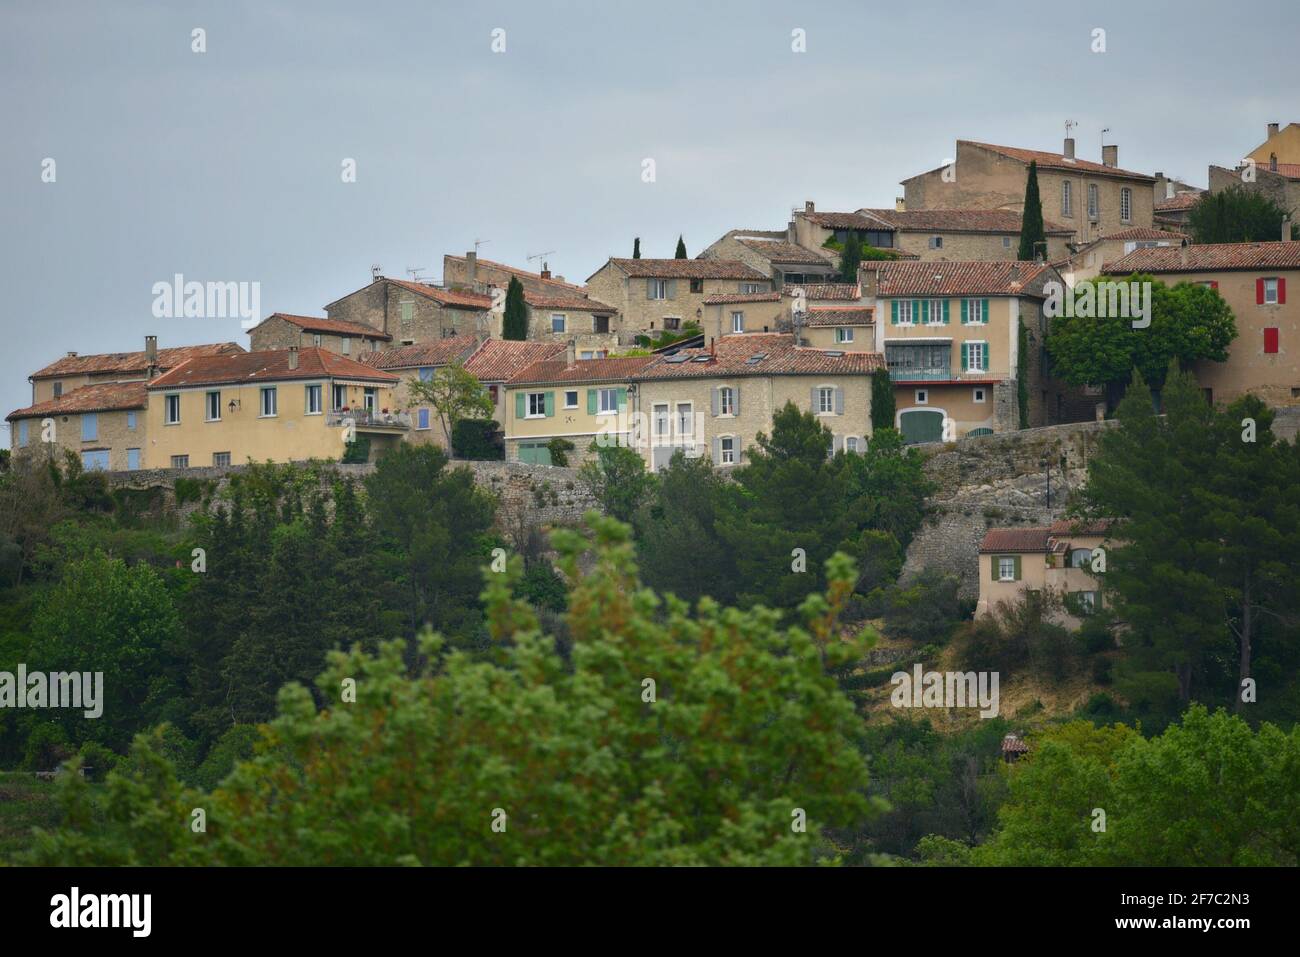 Landscape with scenic view of Grambois a picturesque village with Provençal architecture in Provence-Alpes-Côte d'Azur, Vaucluse, France. Stock Photo